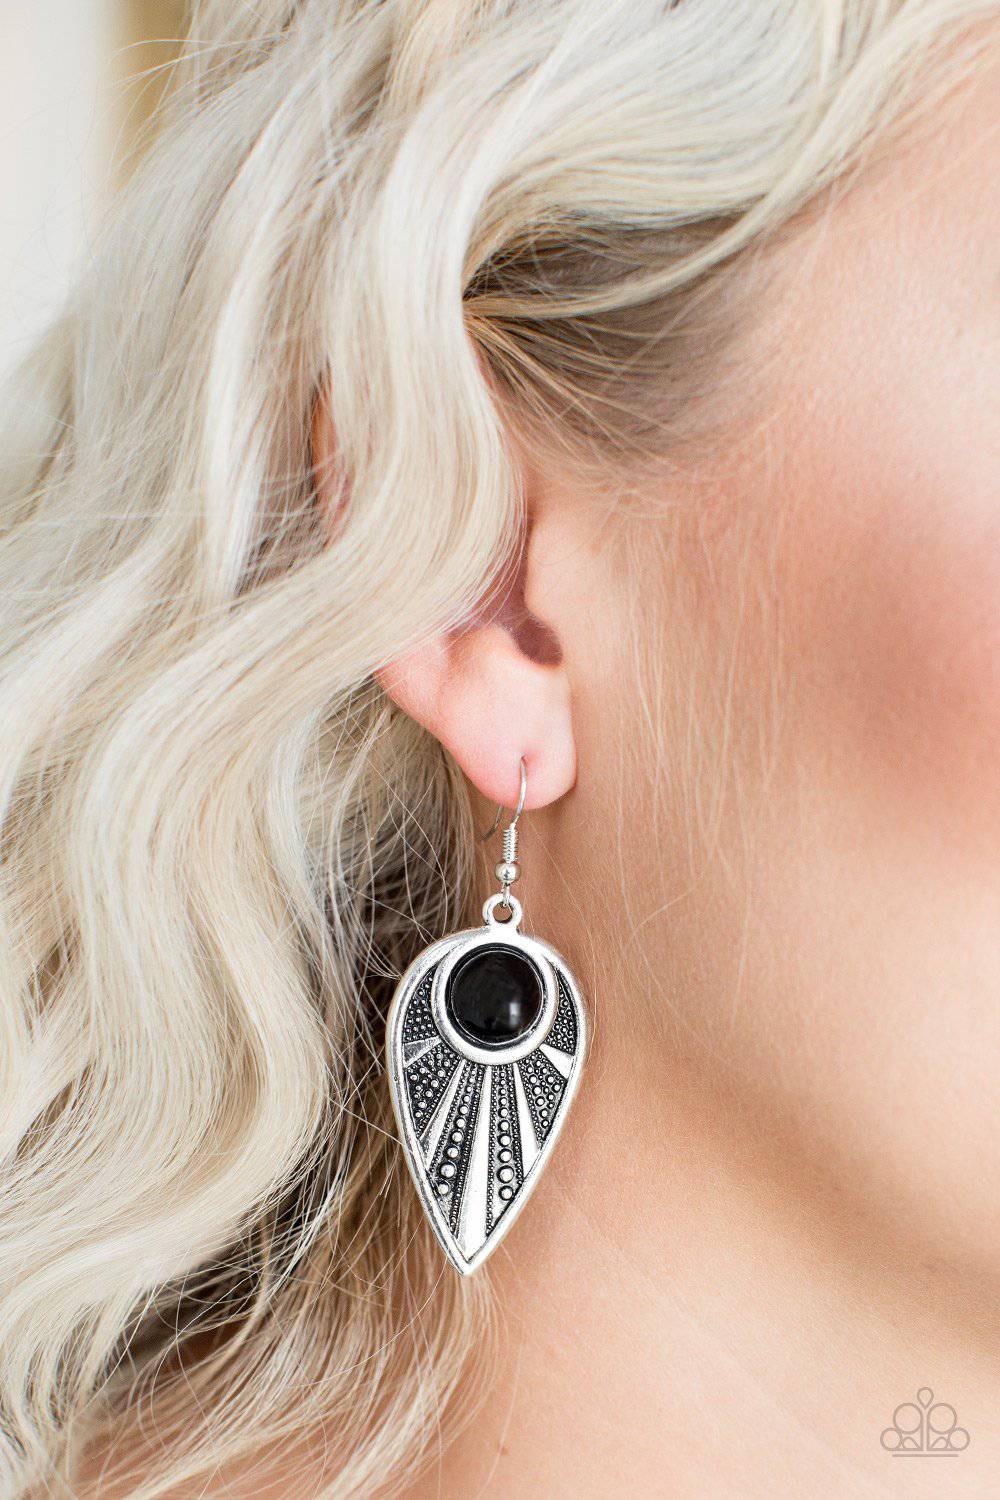 D2 - Take a Walkabout Black Earrings by Paparazzi Accessories on Fancy5Fashion.com